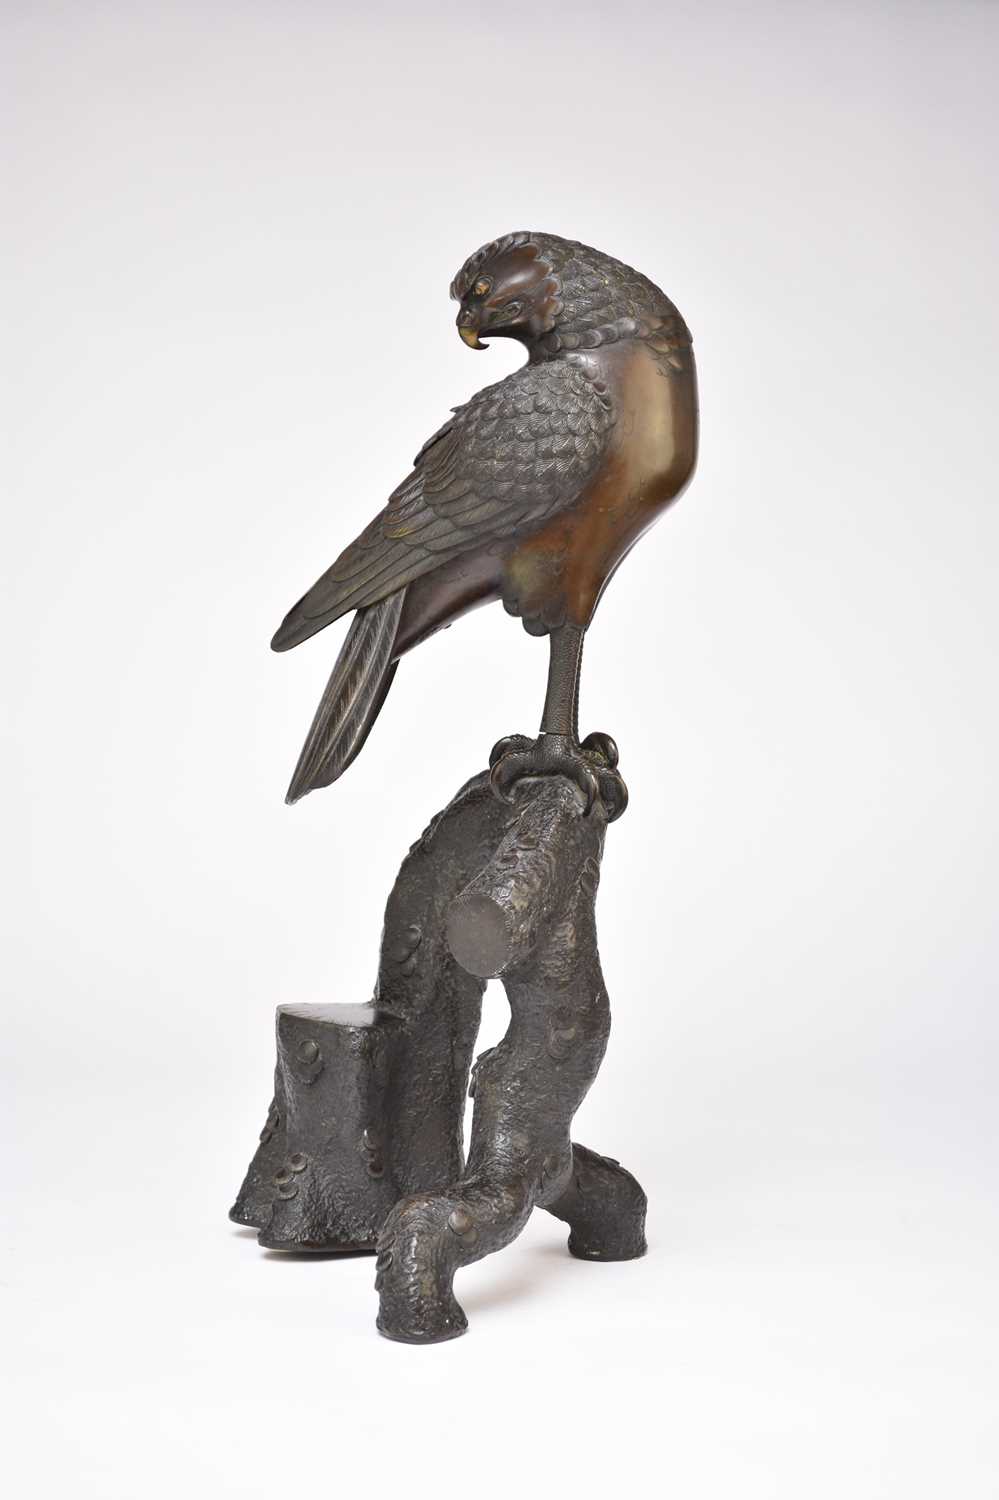 102 - A Japanese bronze figure of an eagle perched on a branch